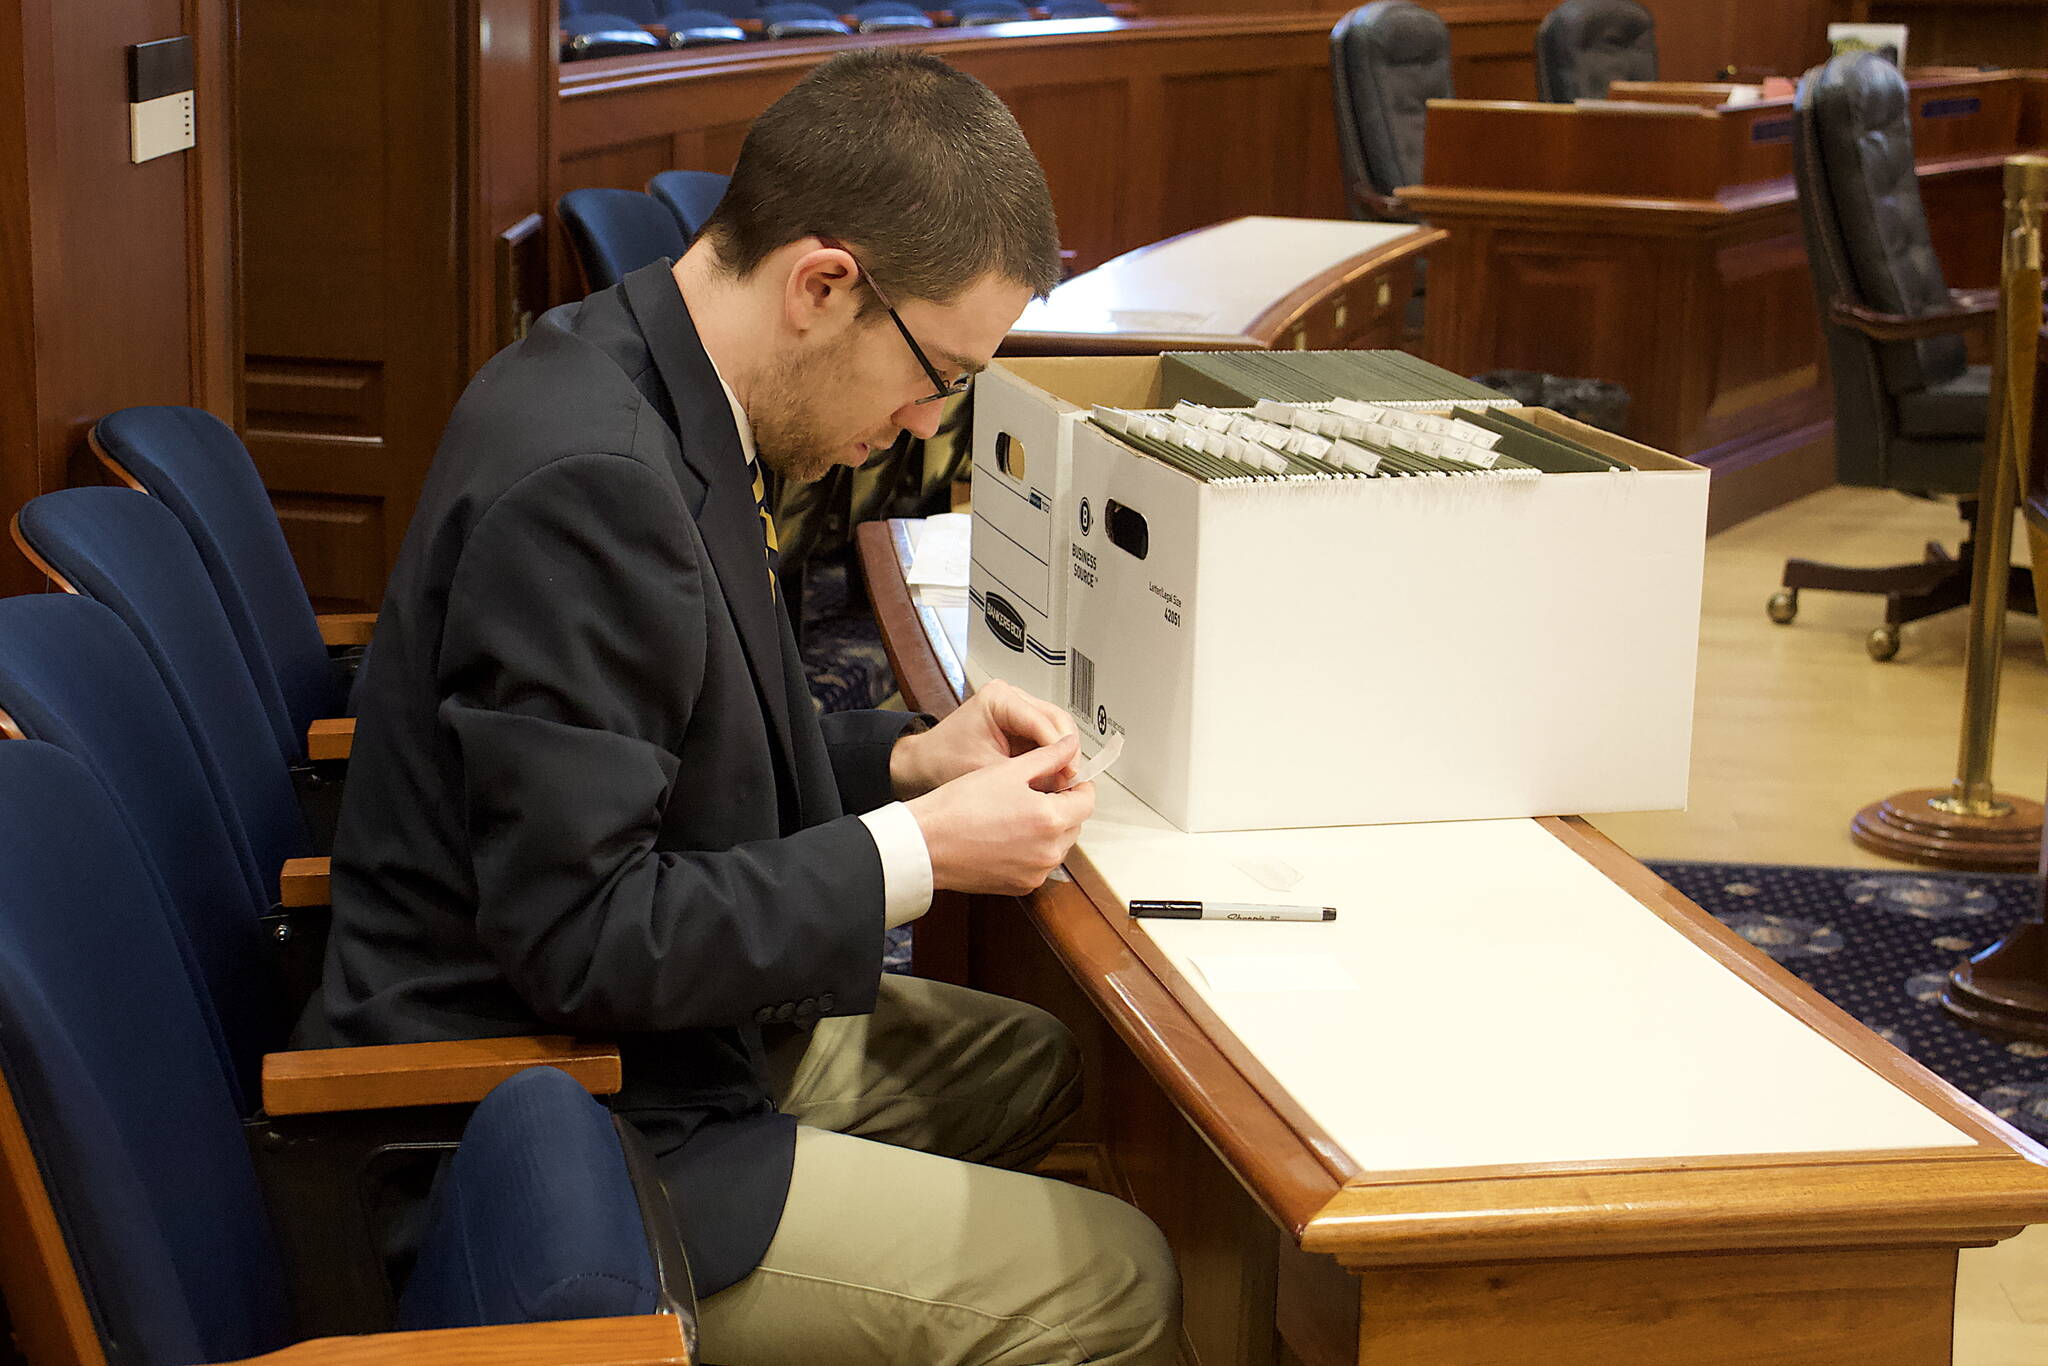 Ryan Rivers, a state Senate page, prepares file folders for proposed amendments to the state budget bill the Senate is scheduled to consider during its floor session Monday. (Mark Sabbatini / Juneau Empire)